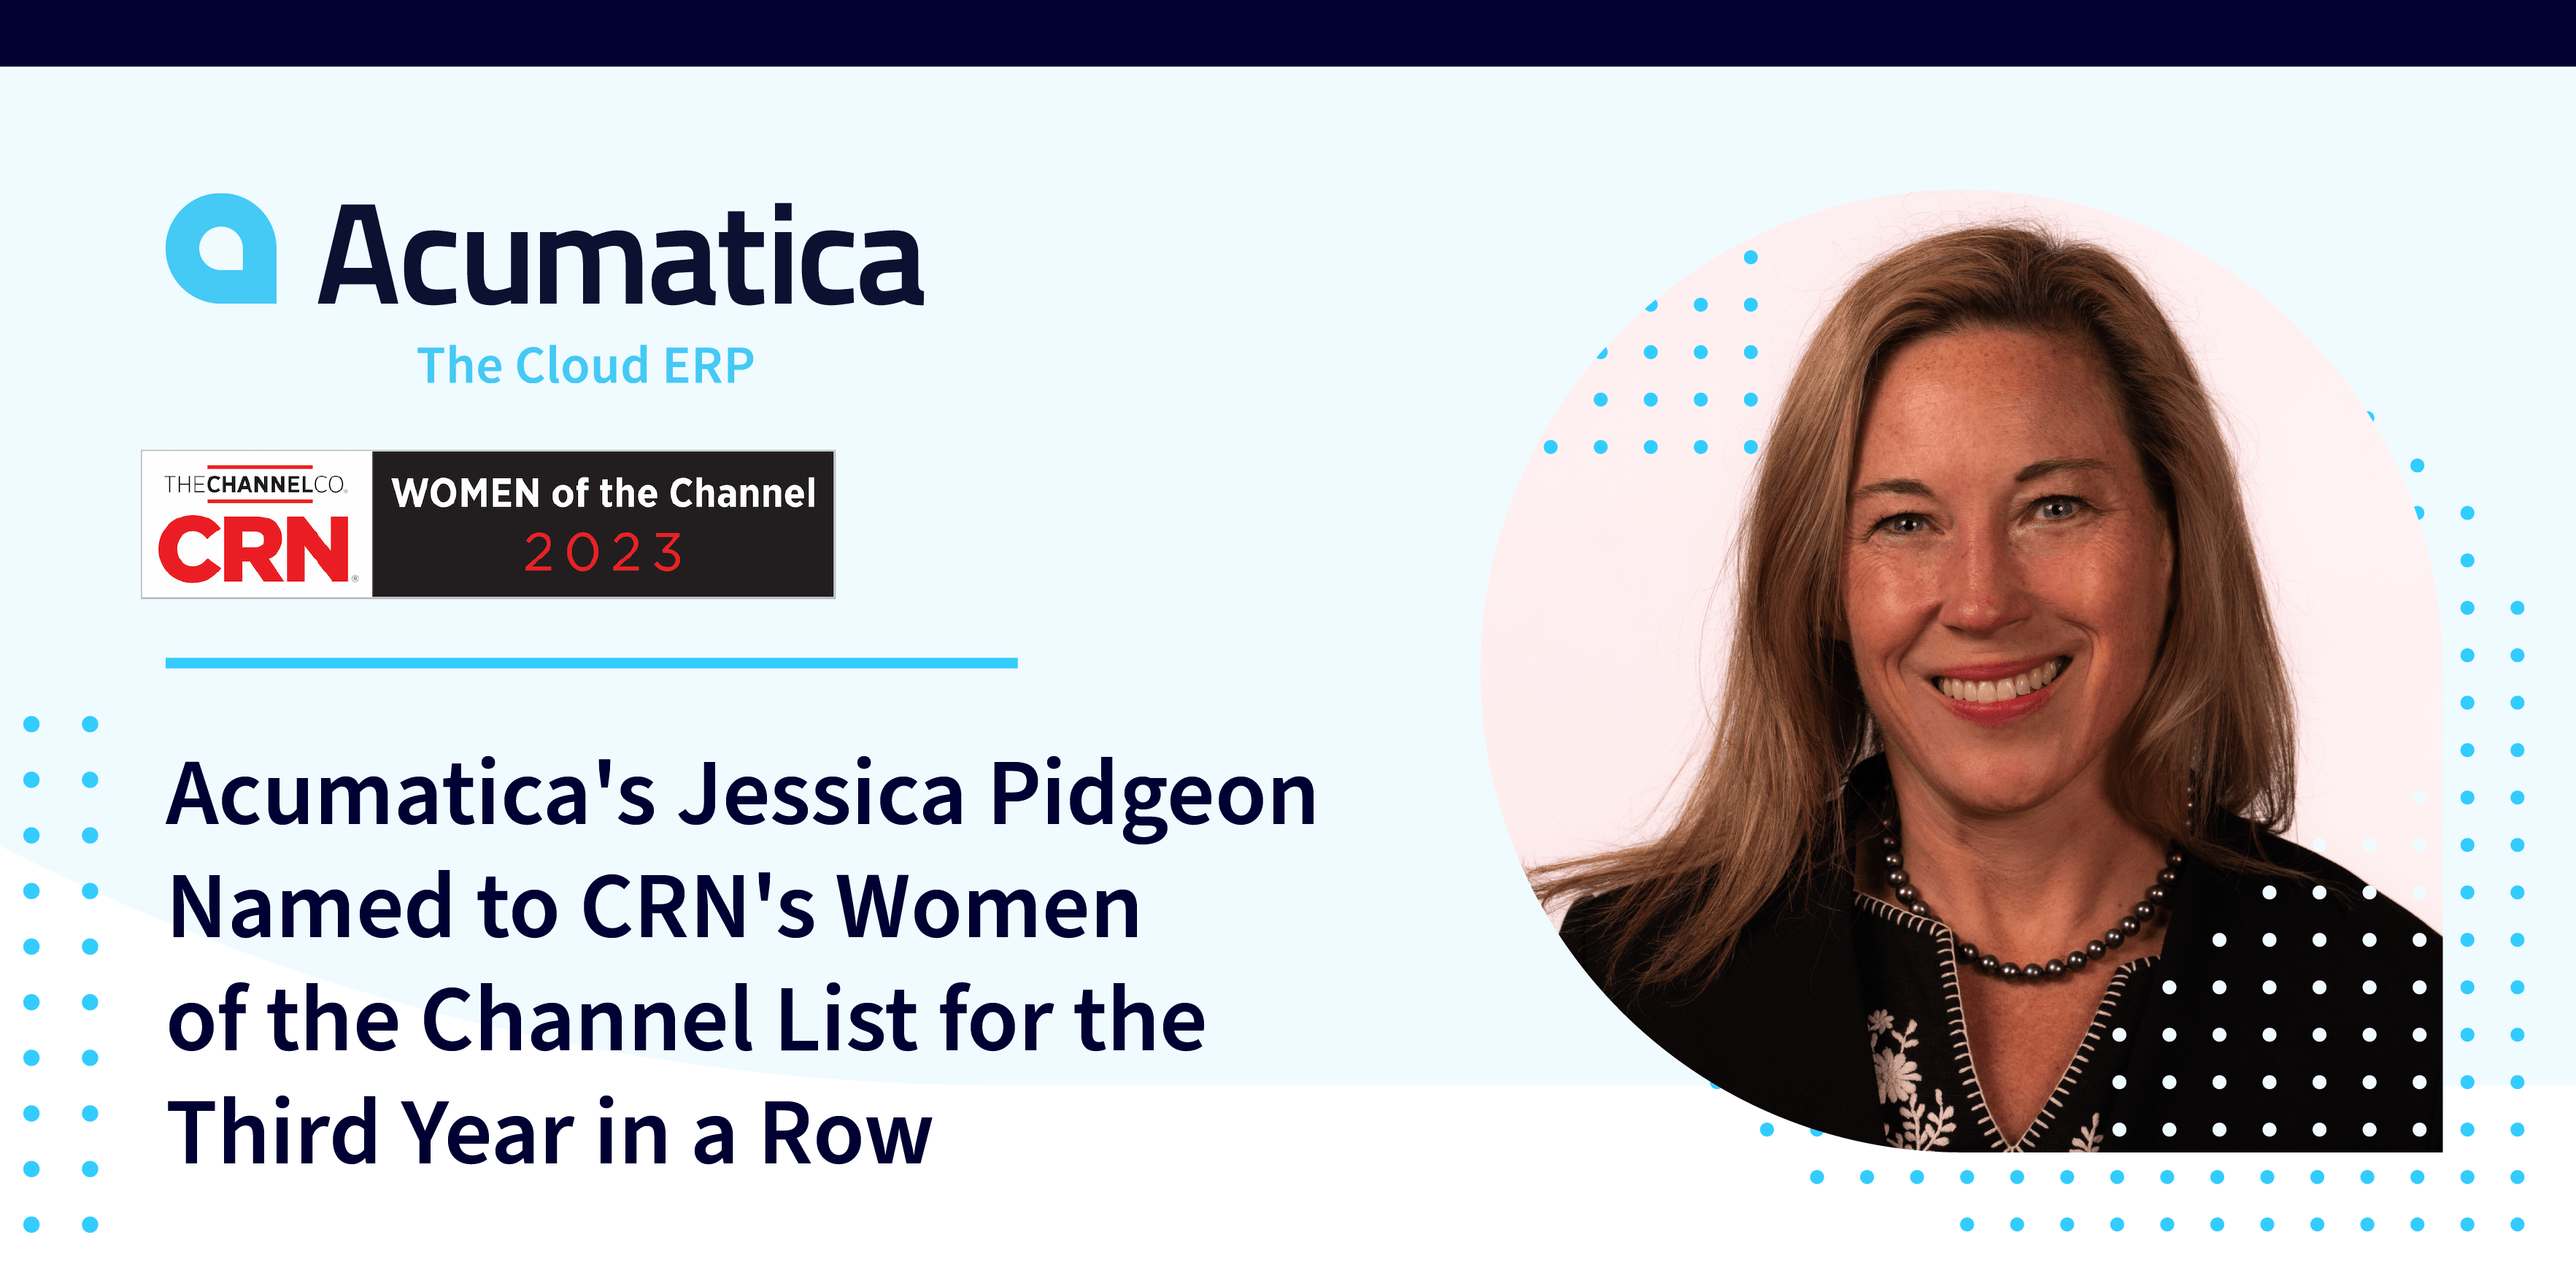 Acumatica's Jessica Pidgeon Named to CRN's Women of the Channel List for the Third Year in a Row